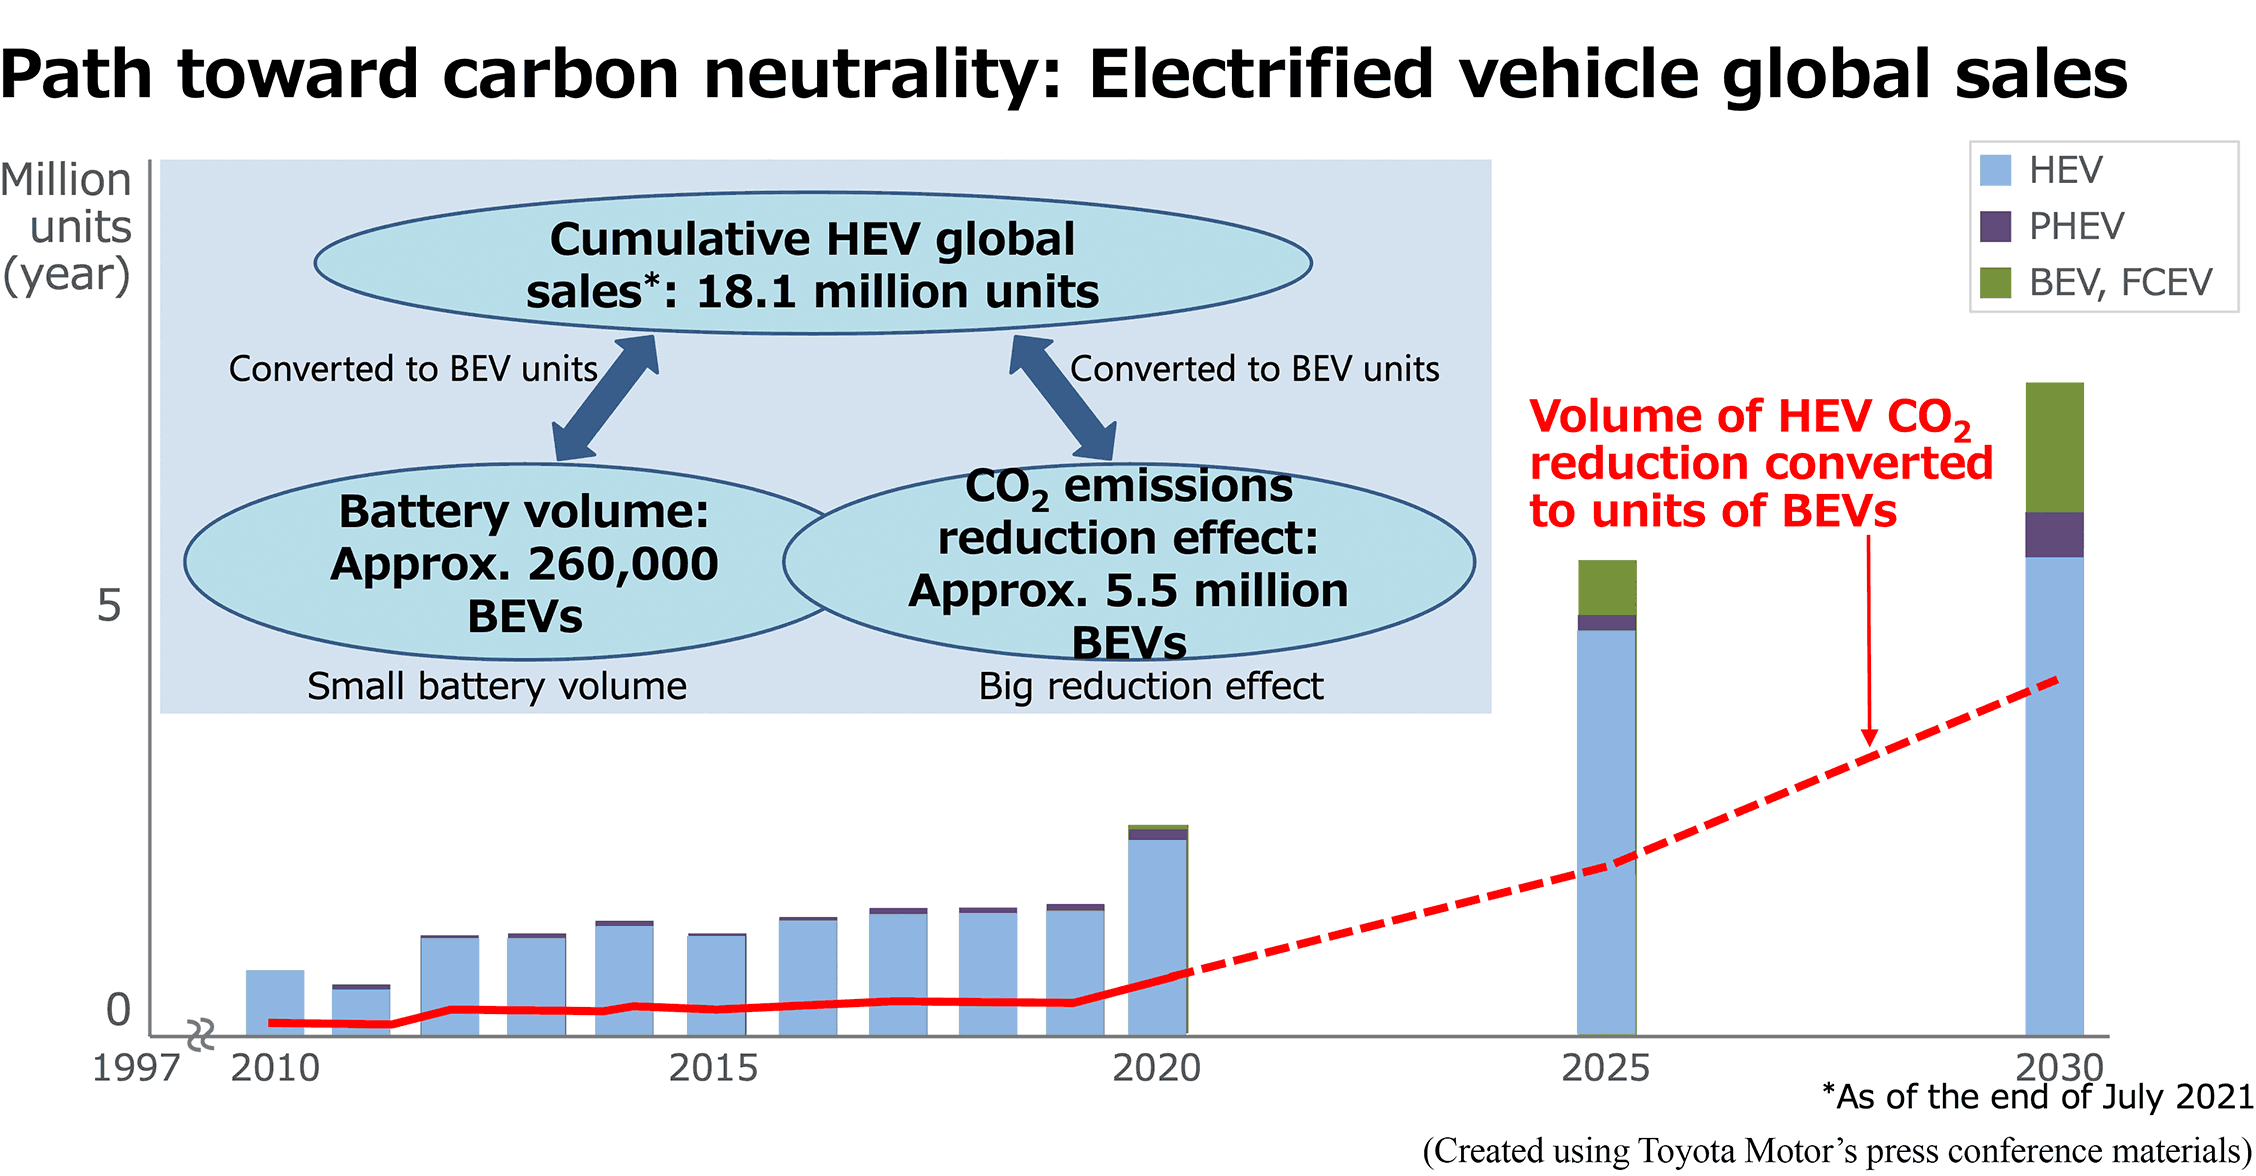 Toyota Motor’s Electric Vehicle Sales Results and Plans